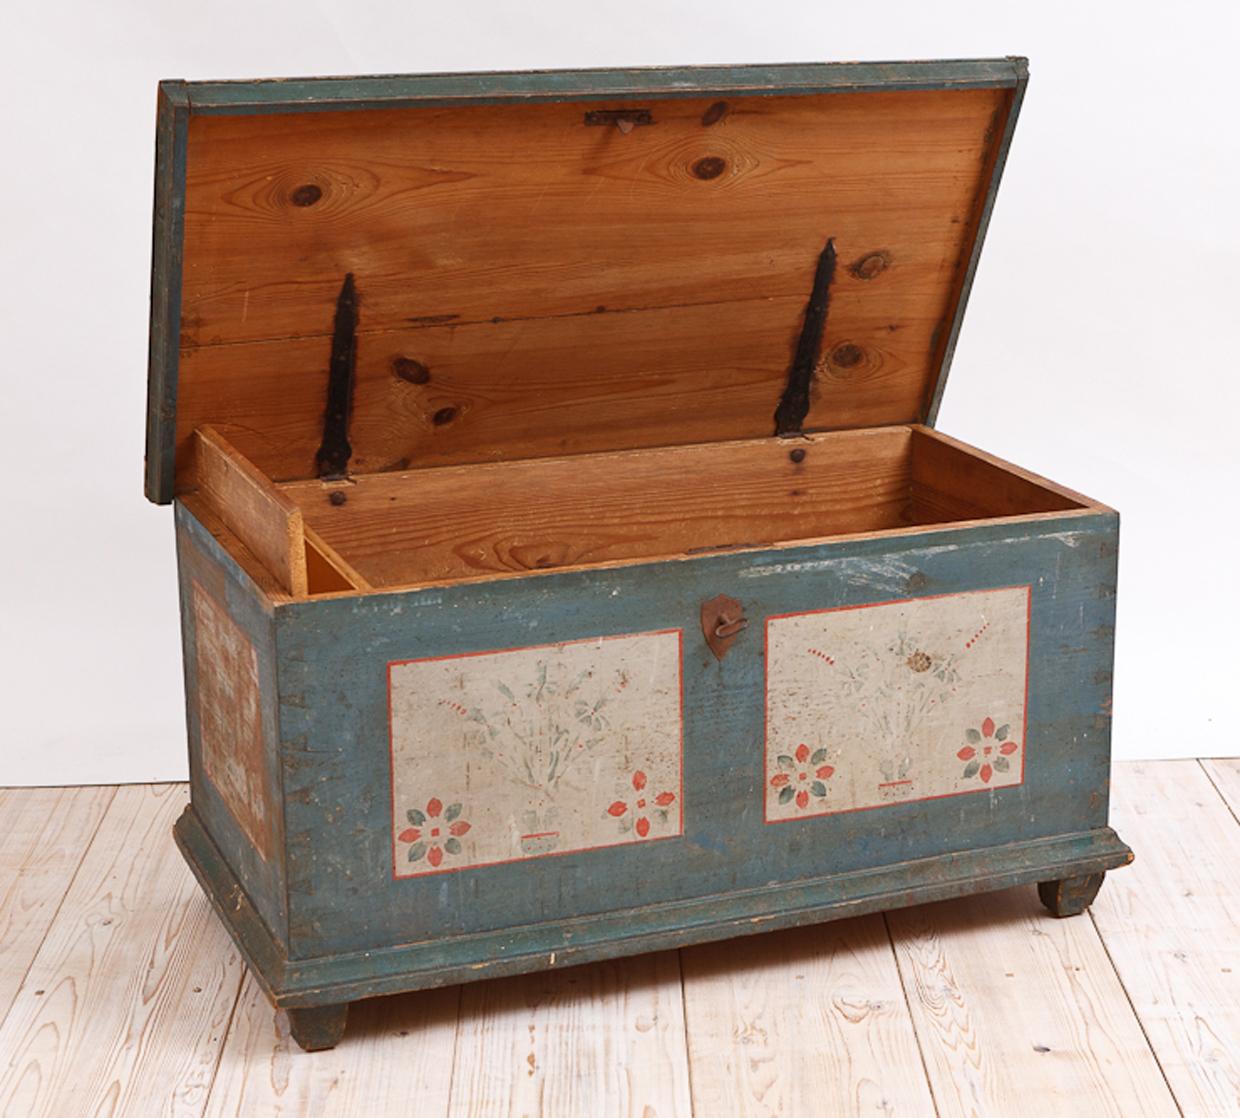 Scandinavian Dowry Chest with Original Blue Paint & Floral Design, Northern Europe circa 1780